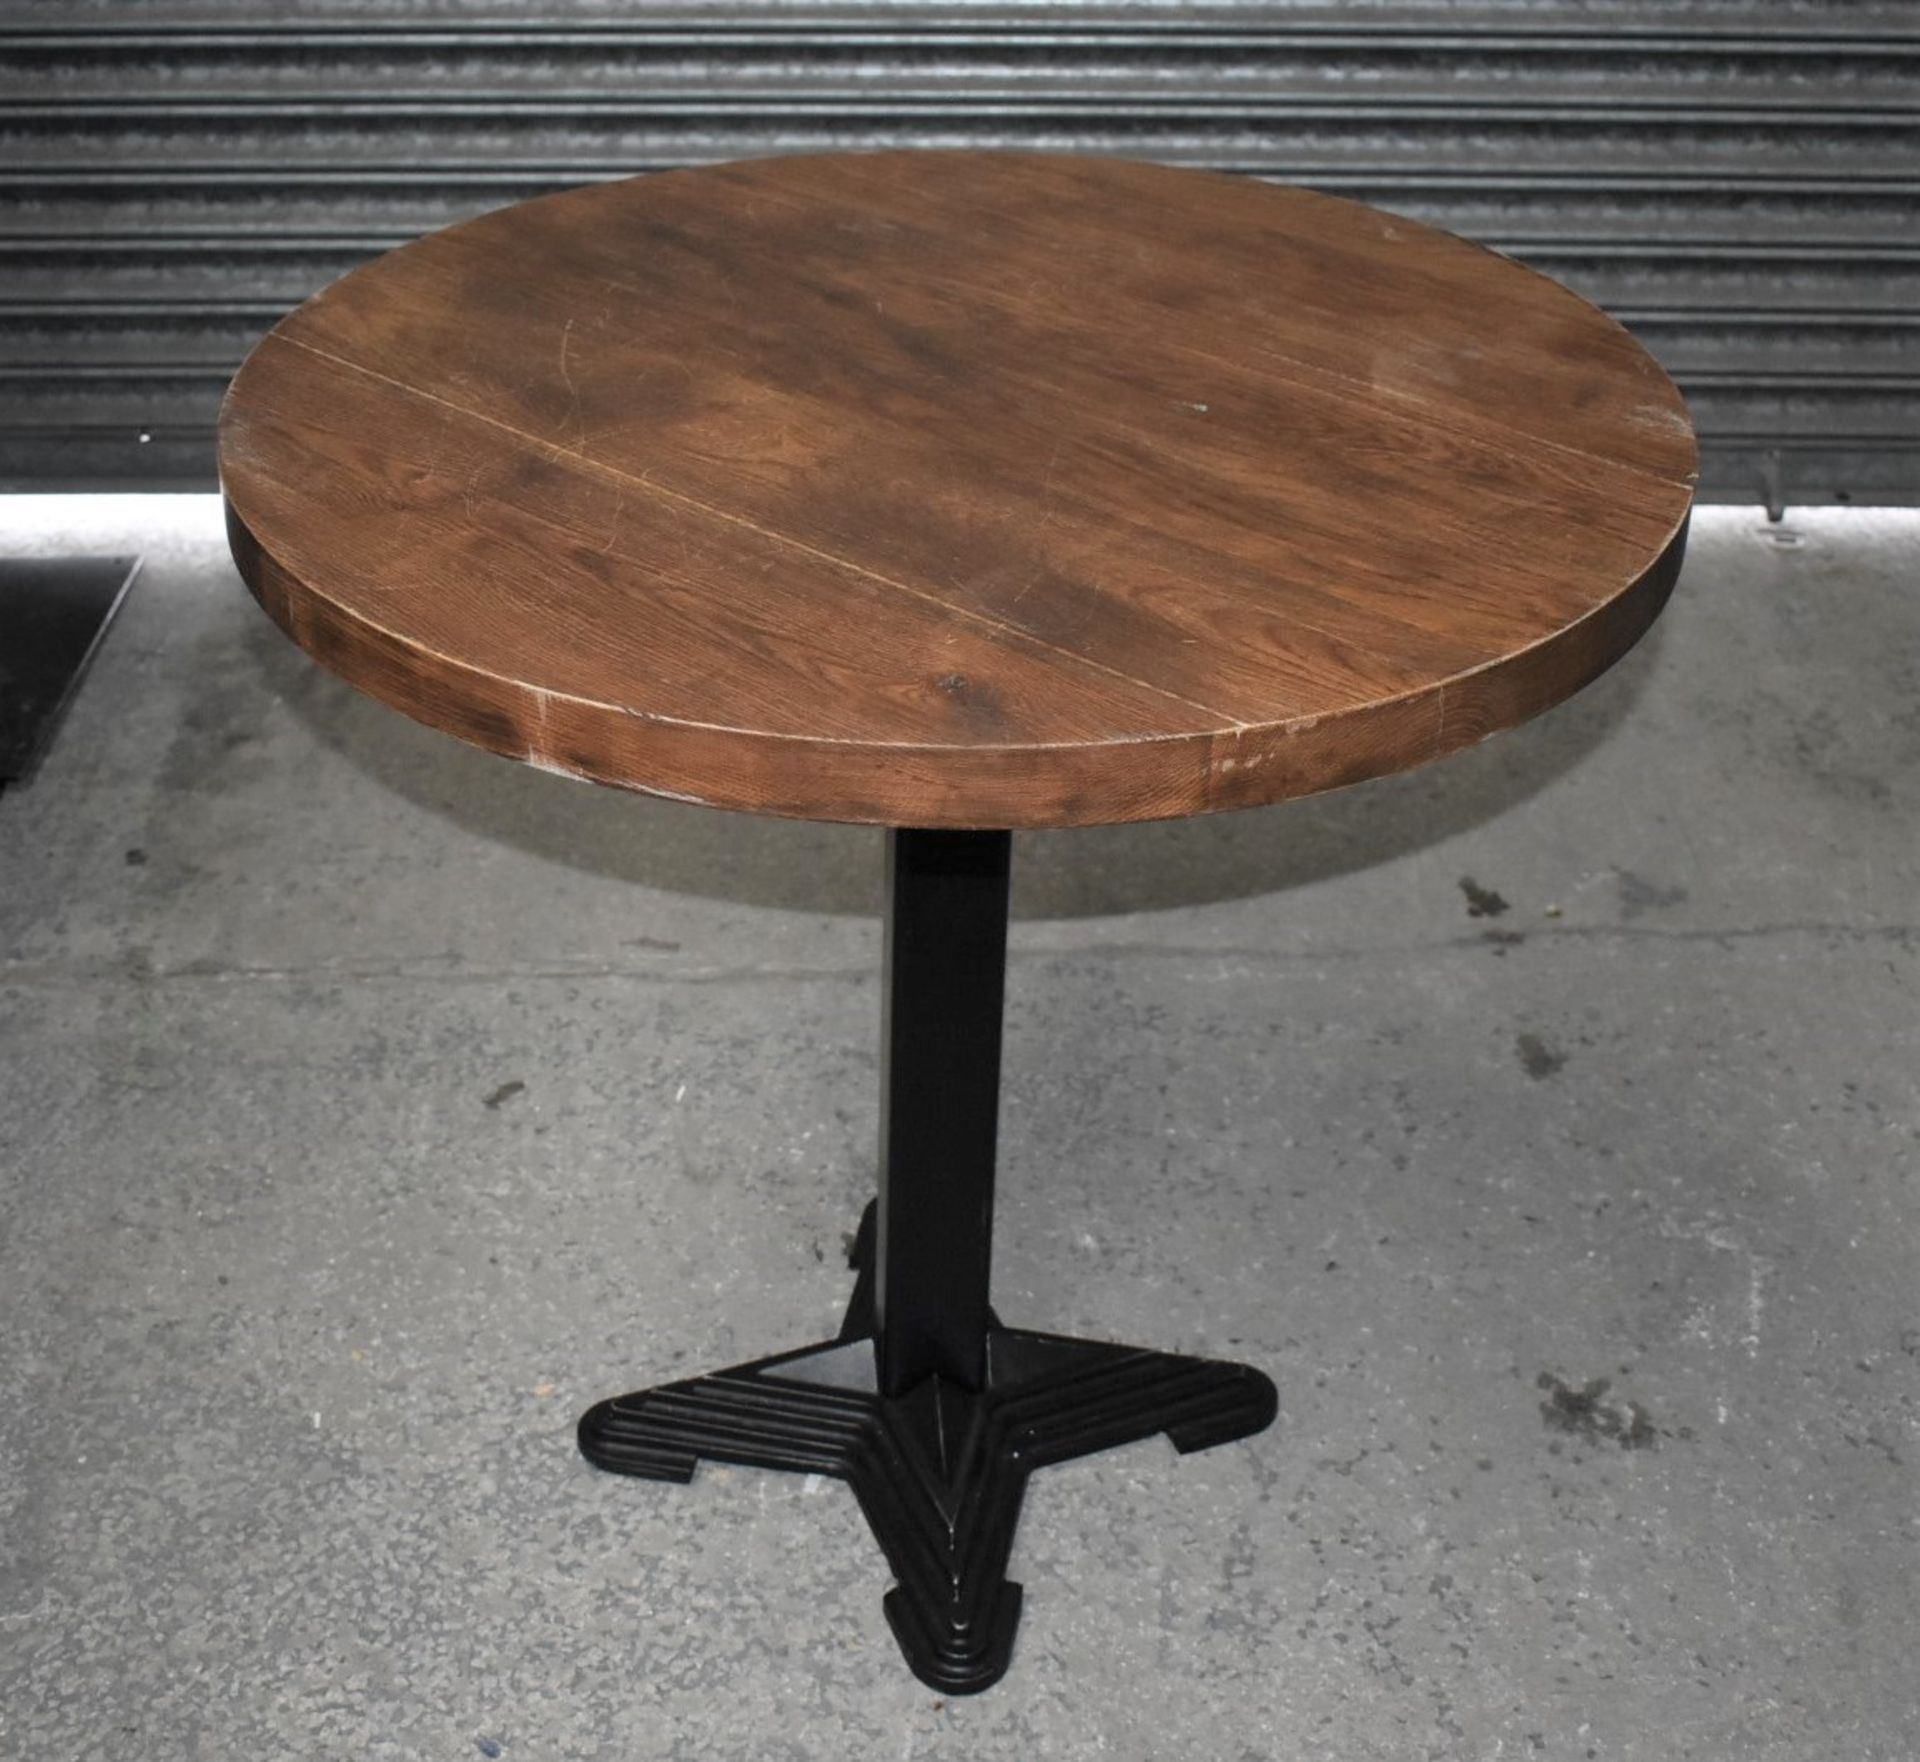 9 x Restaurant Dining Tables With Cast Iron Bases and Solid Wood Tops - Includes Square and Round